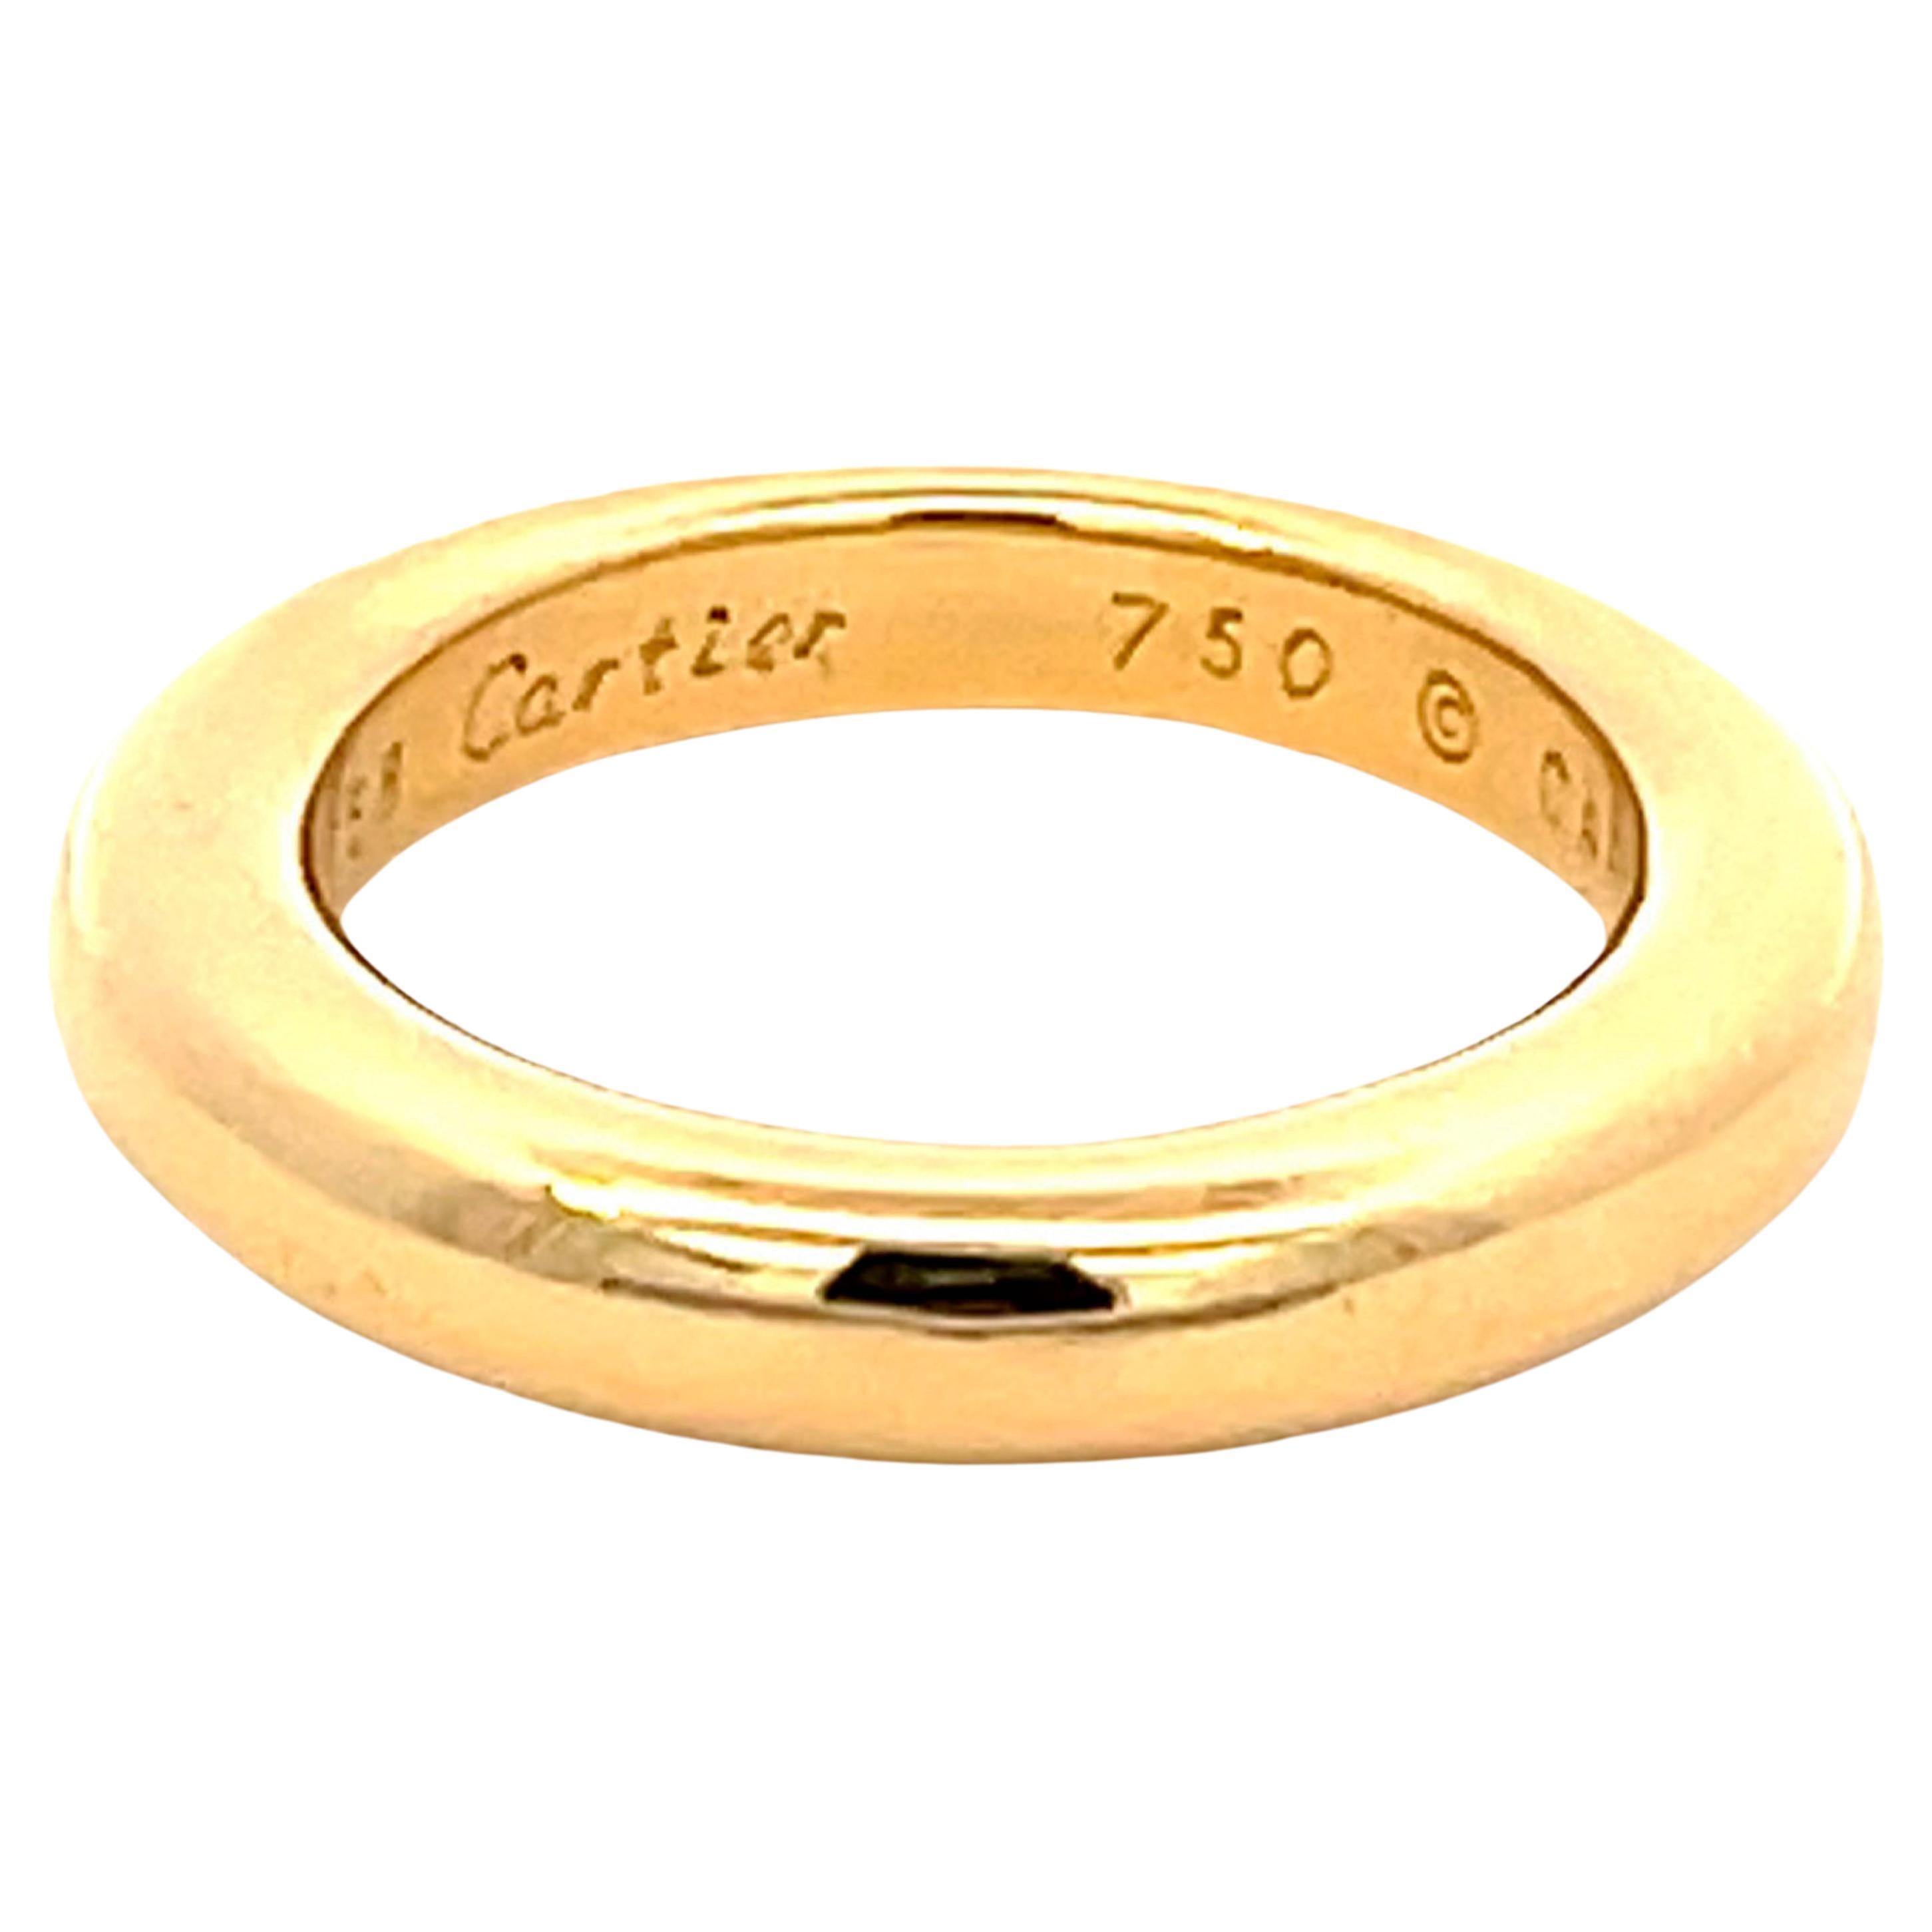 Vintage Cartier 1992 Ellipse Ring in 18k Yellow Gold